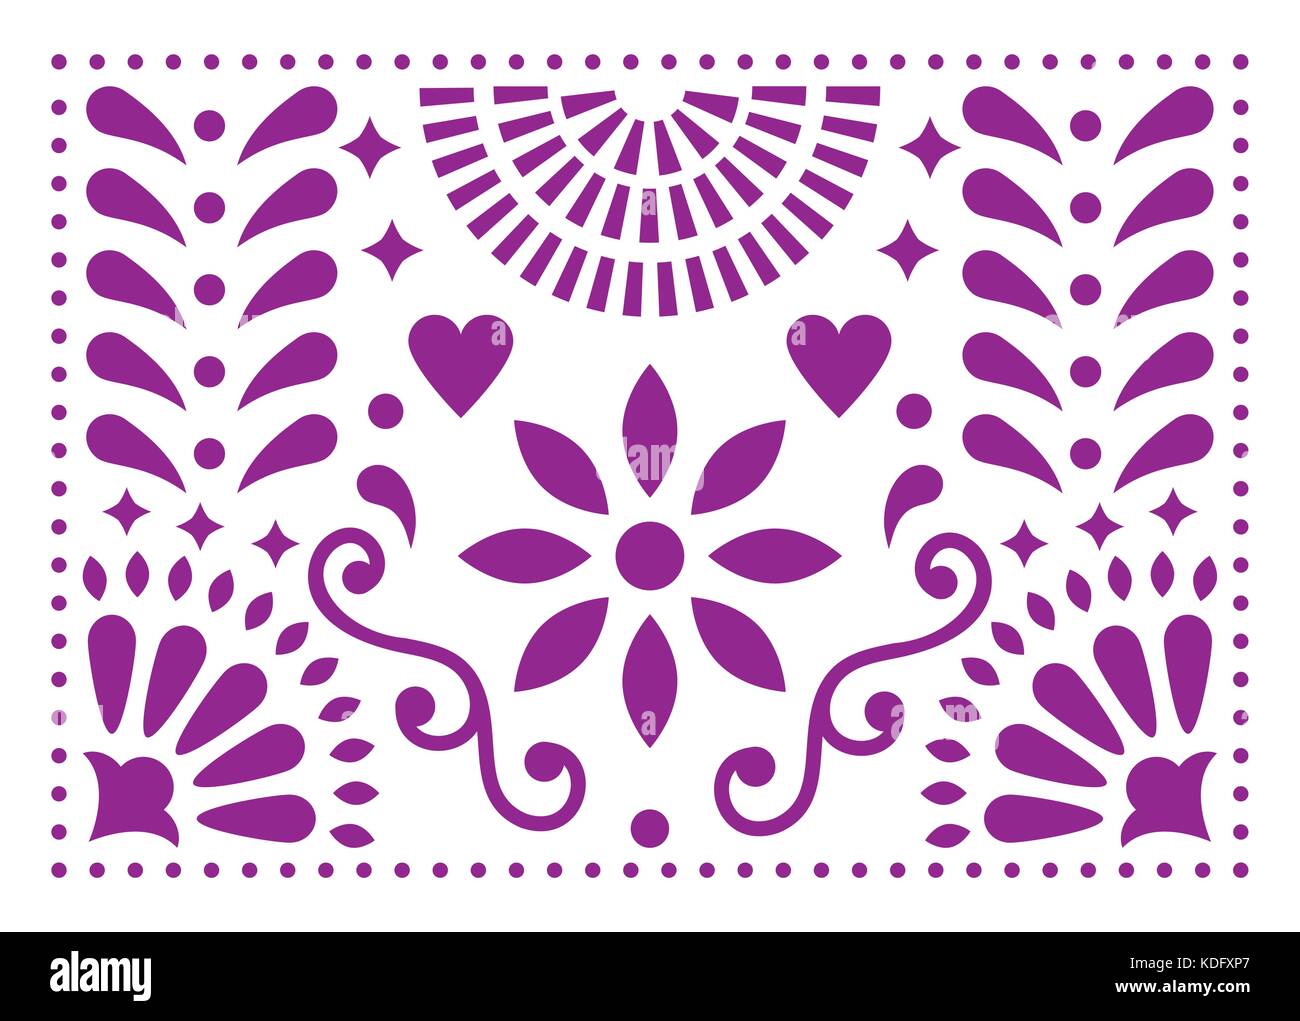 Mexican folk art vector pattern, purple design with flowers inspired by traditional art form Mexico Stock Vector